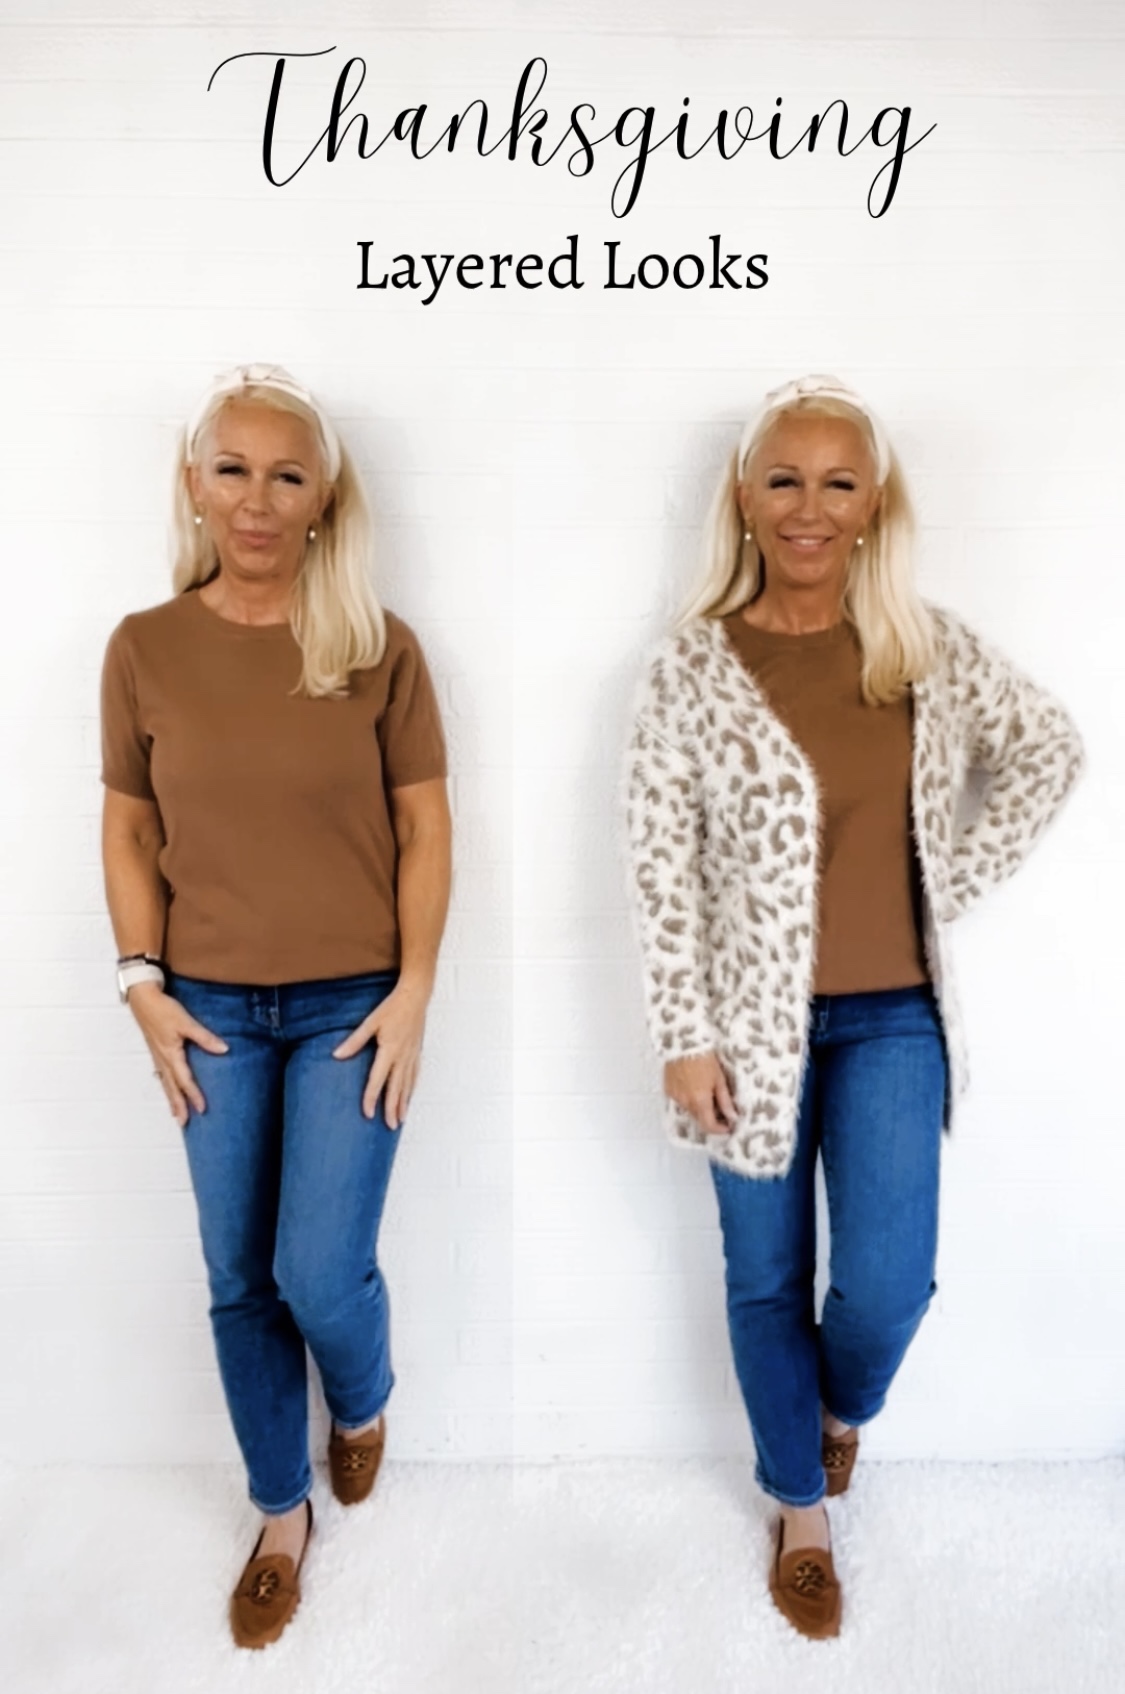 Layered Thanksgiving Outfits for Menopausal Women